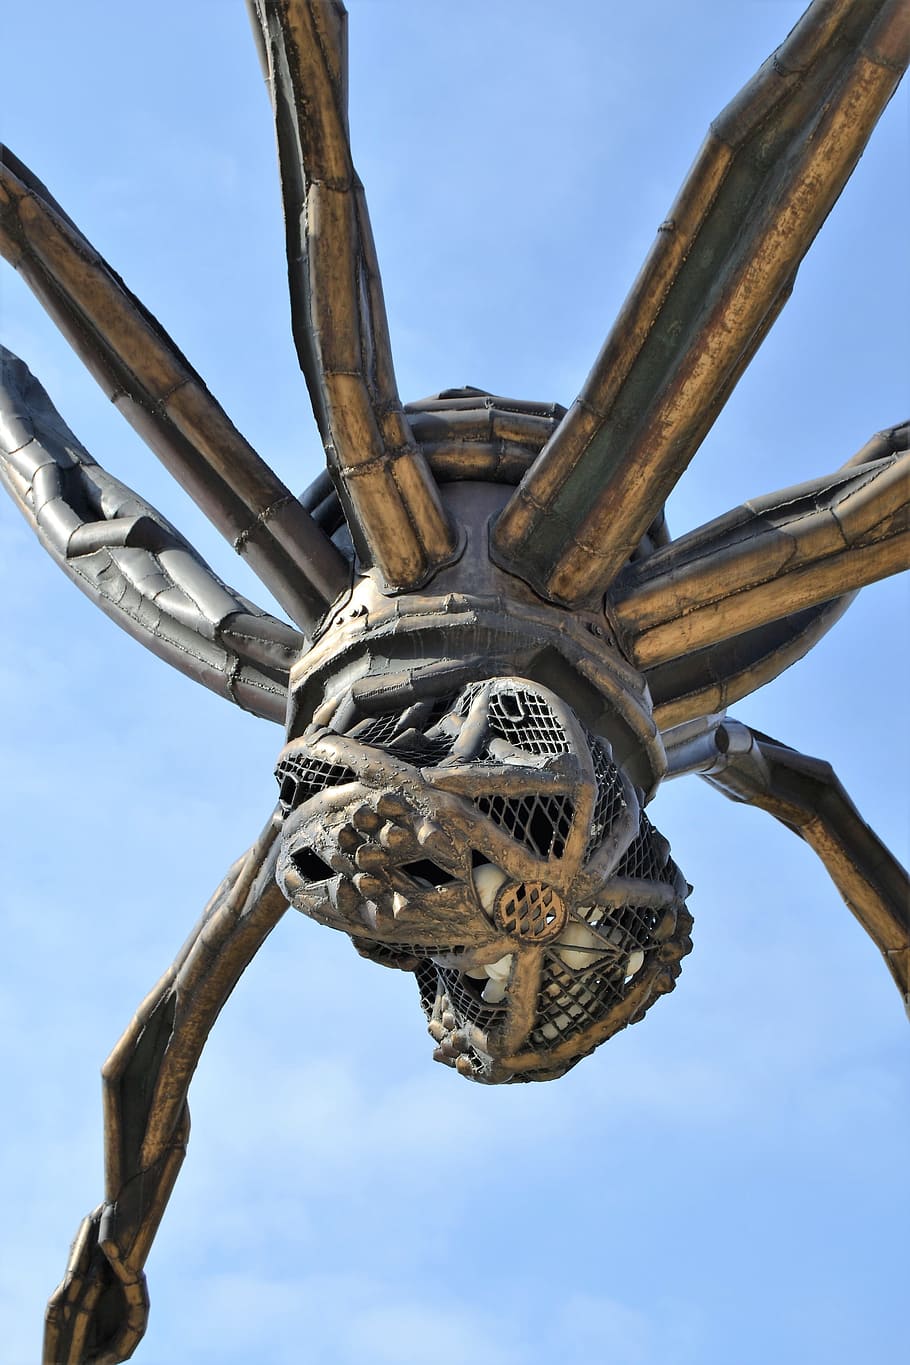 Giant Spider Art at the Guggenheim Bilbao Spain • Travel Tales of Life